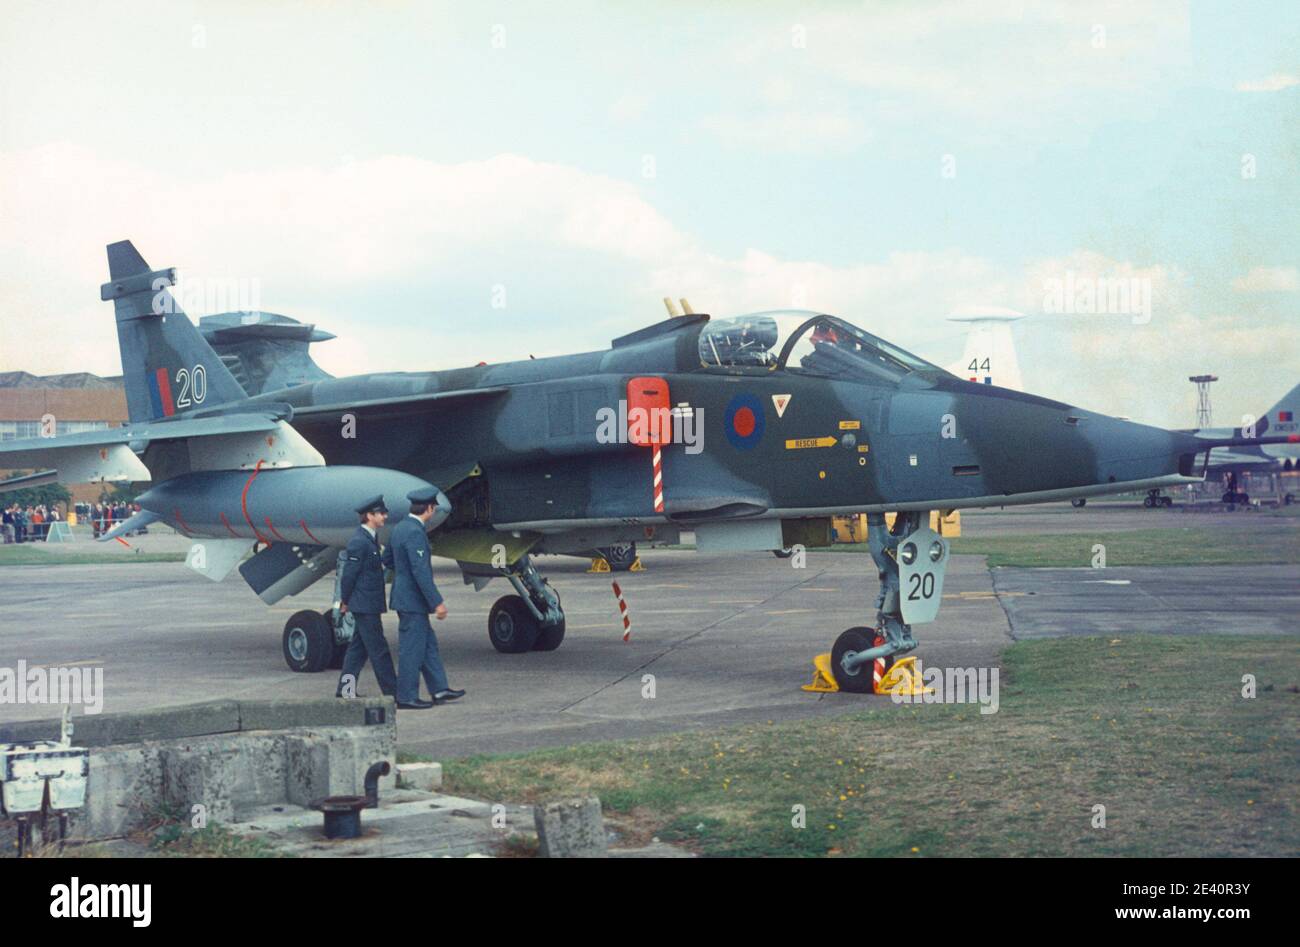 1975 RAF Finningley air display airshow 1975 Two RAF servicemen walking towards the Jaguar XX748 on static display . This Jaguar GR1 is coded '20' of 226 OCU Lossiemouth.The photo is taken 20 Sep 1975 at an air show at  RAF Finningley airfield Doncaster South Yorkshire England UK GB Europe Stock Photo